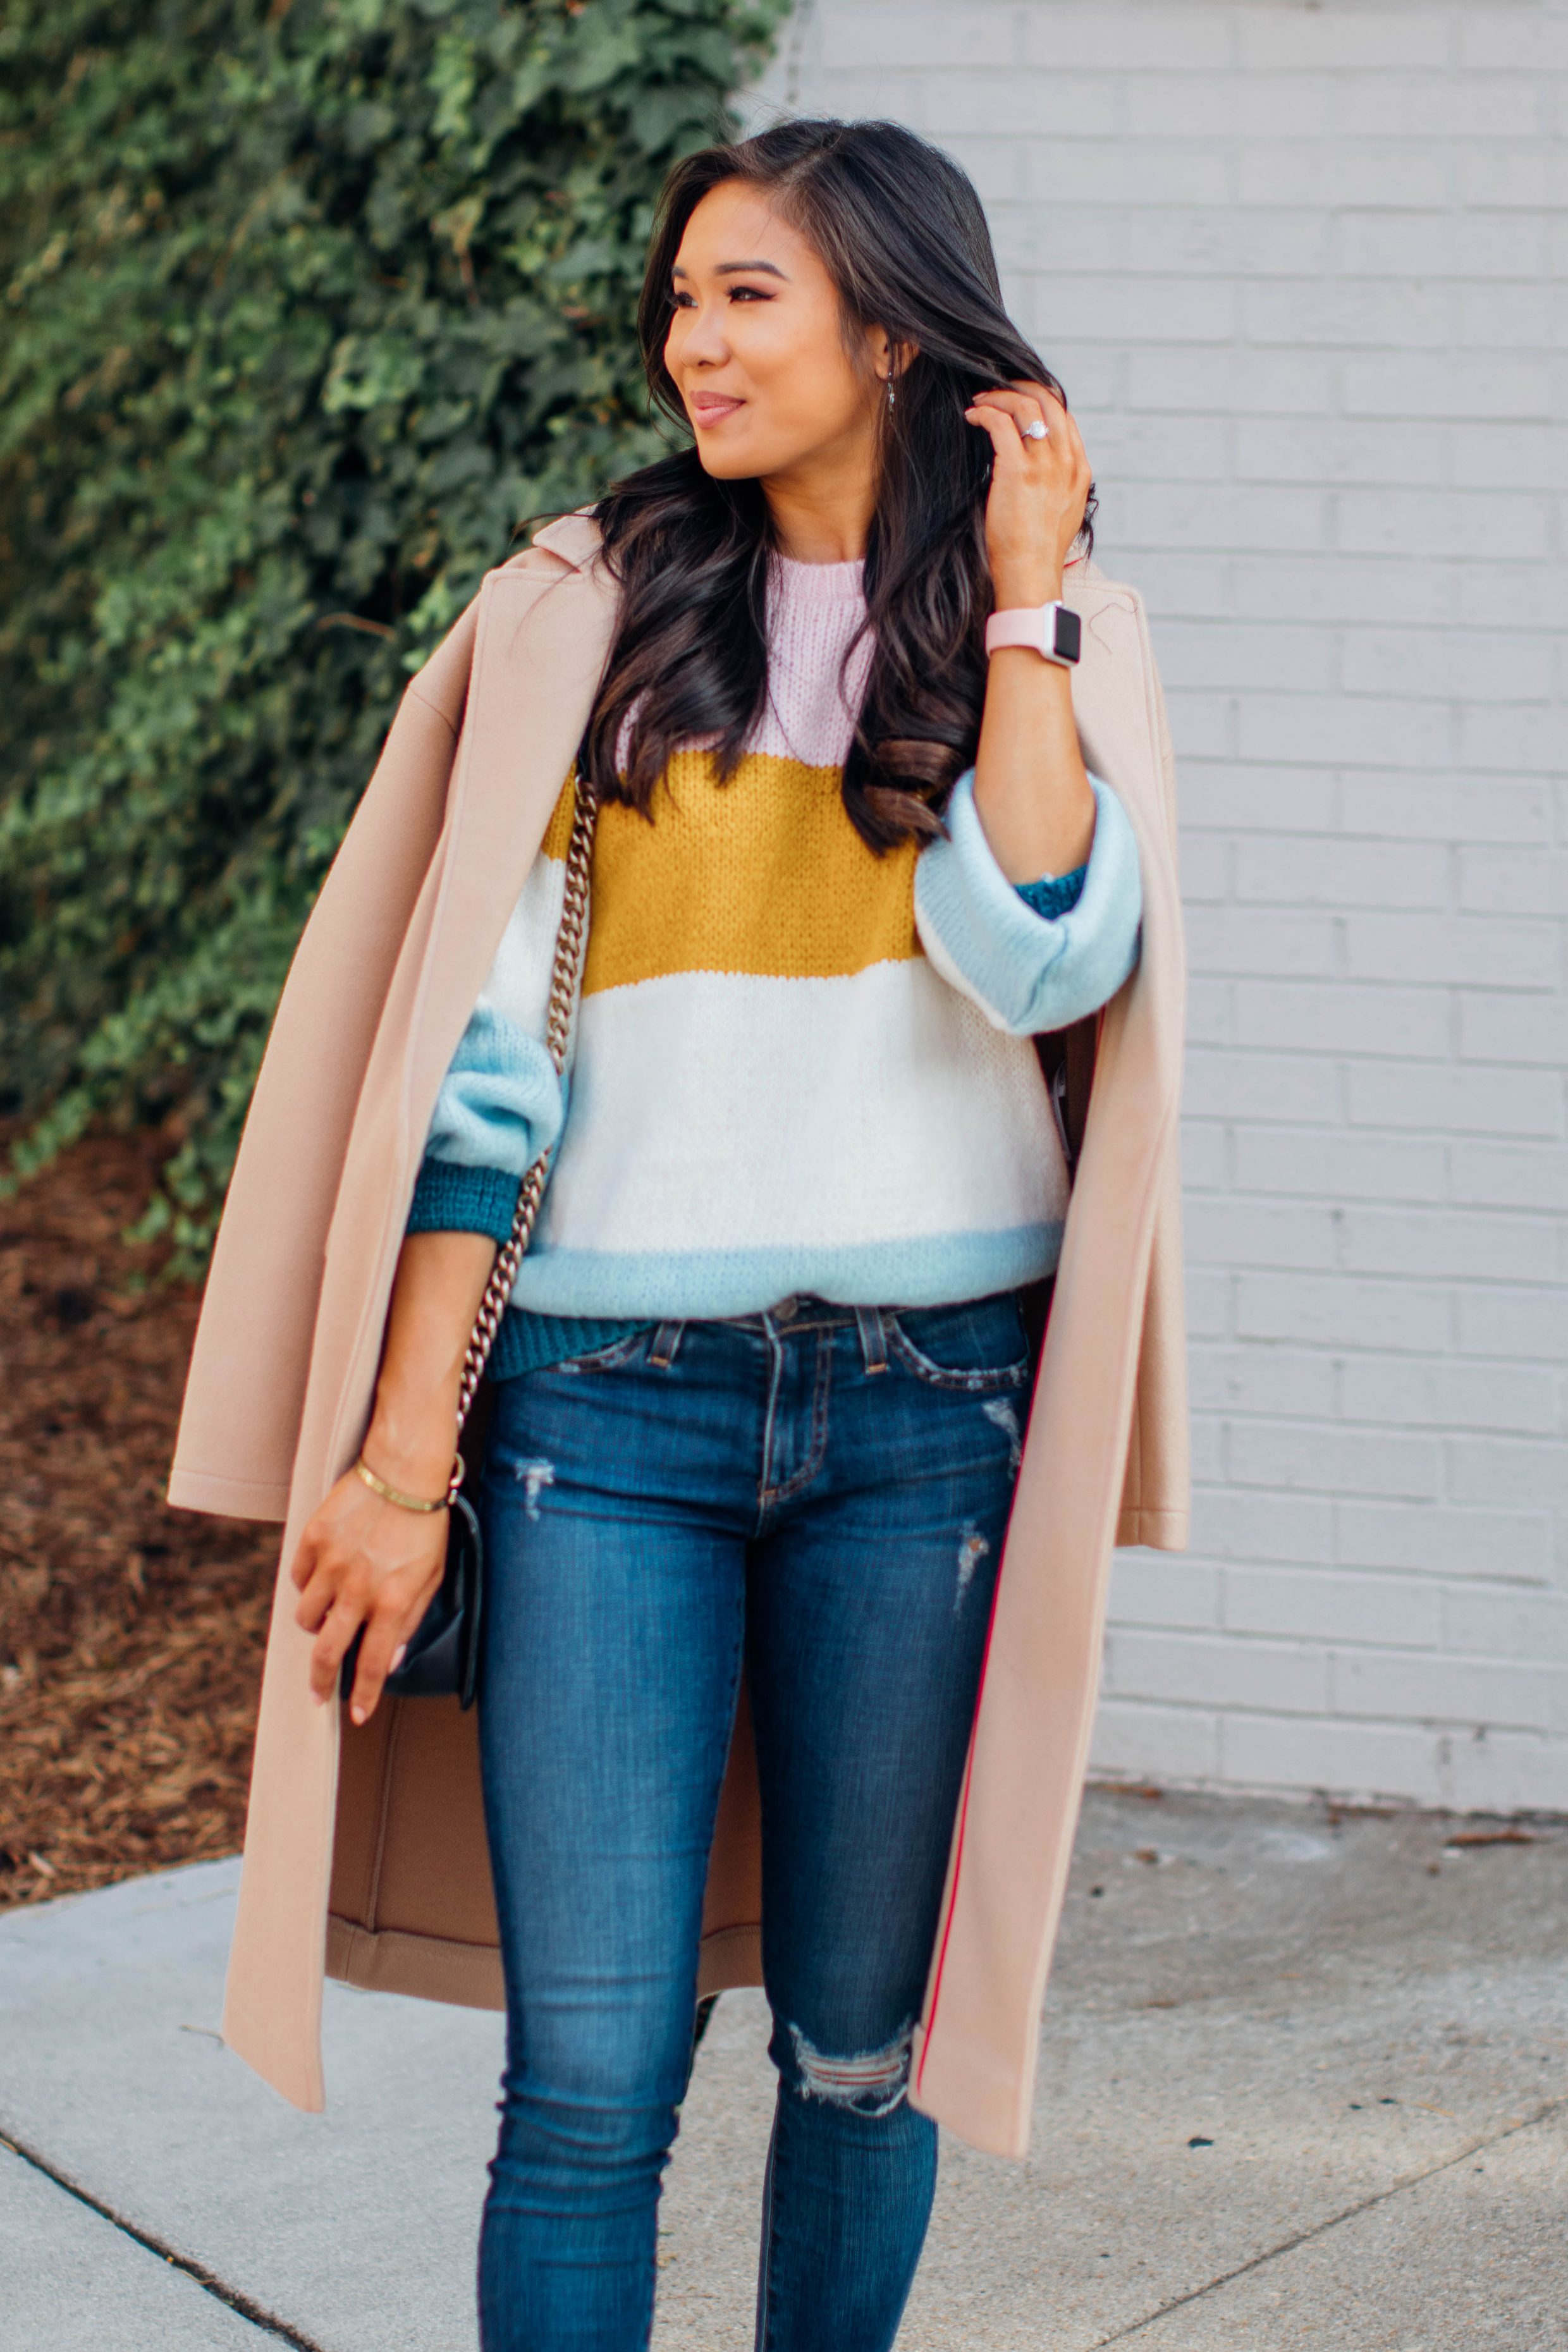 Colorblock sweater and distressed jeans for fall fashion